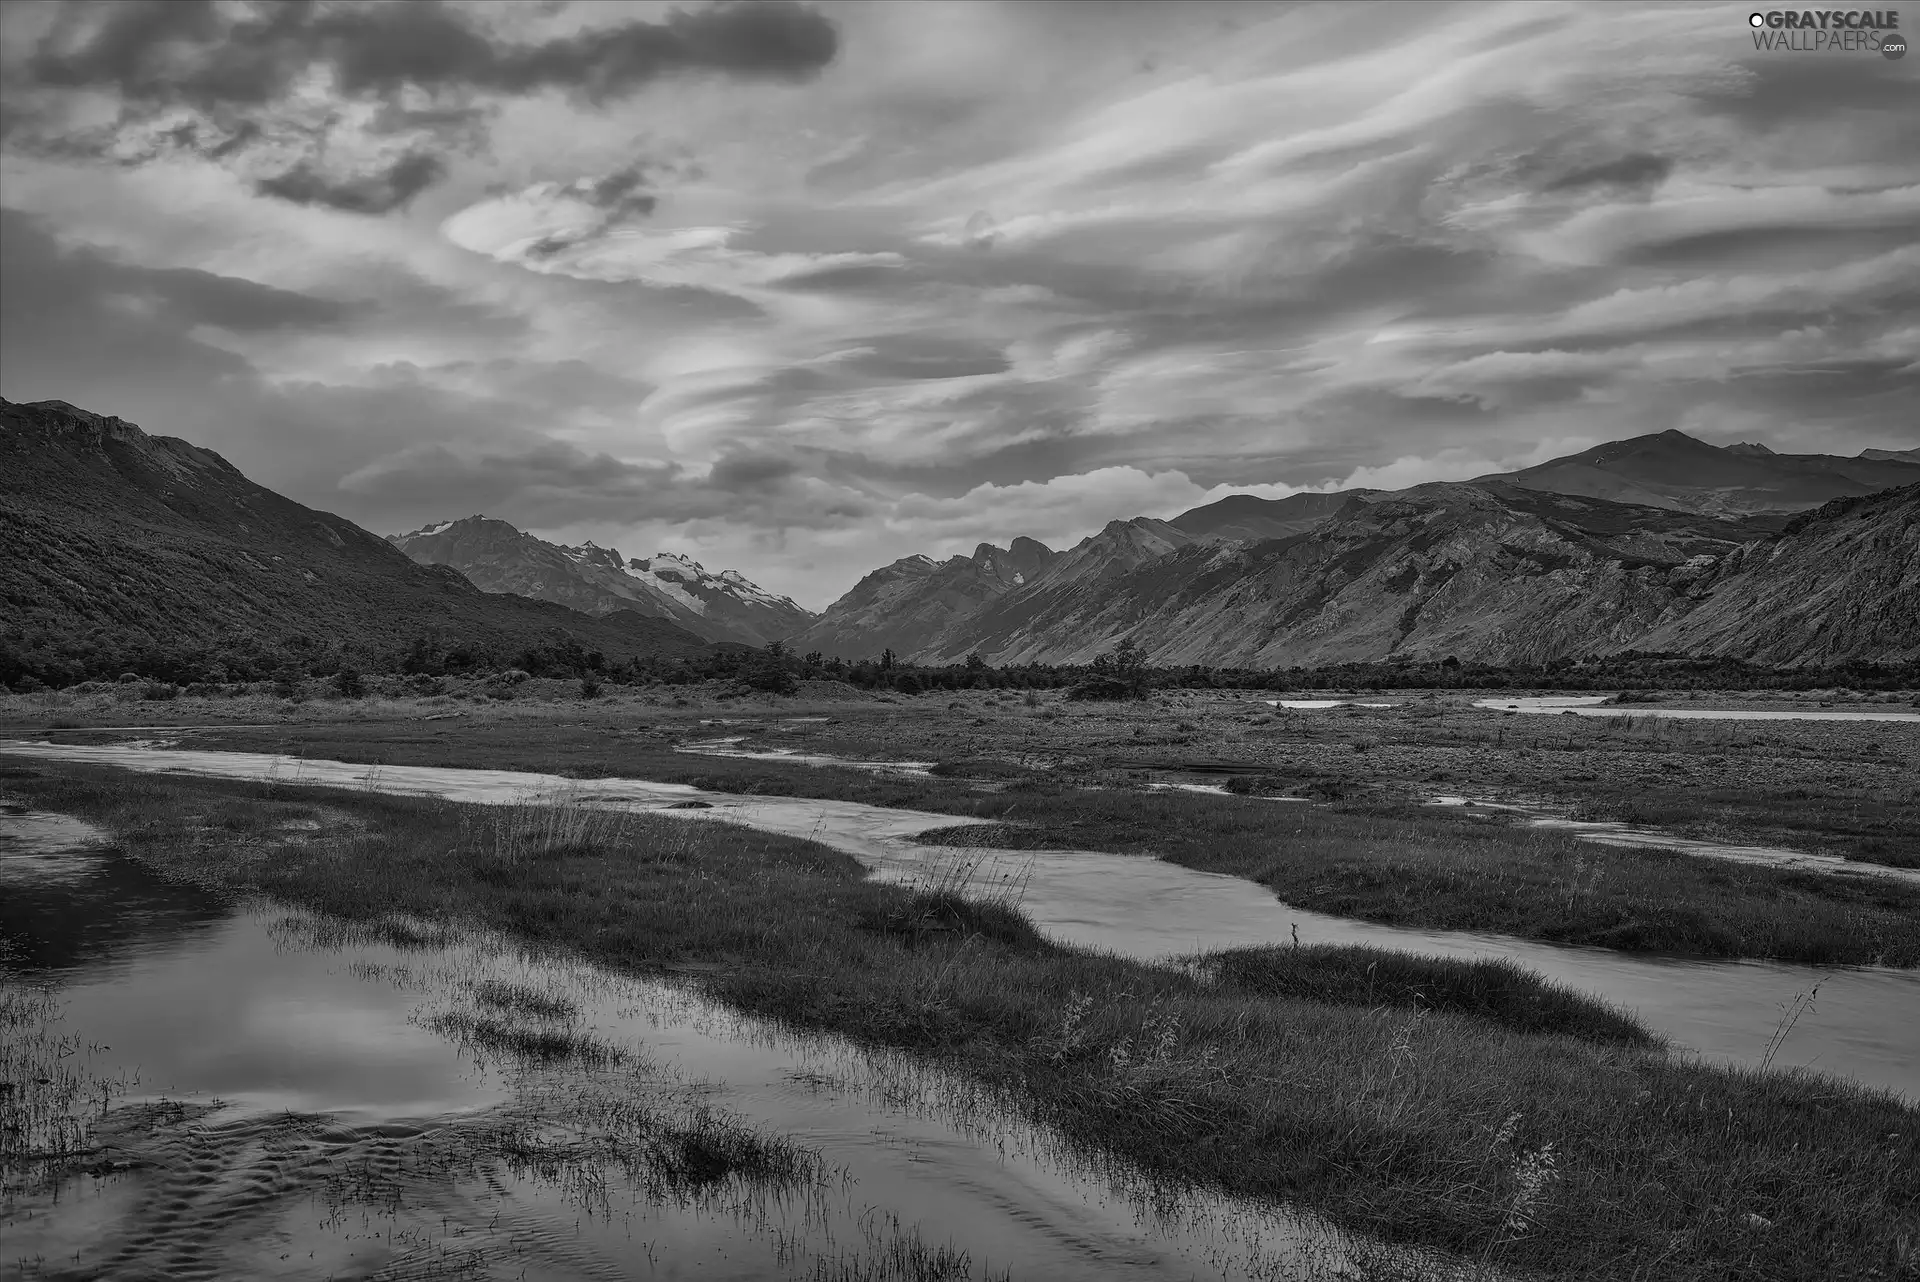 Patagonia, Argentina, River Rio de las Vueltas, Great Sunsets, clouds, Great Sunsets, River, grass, Mountains